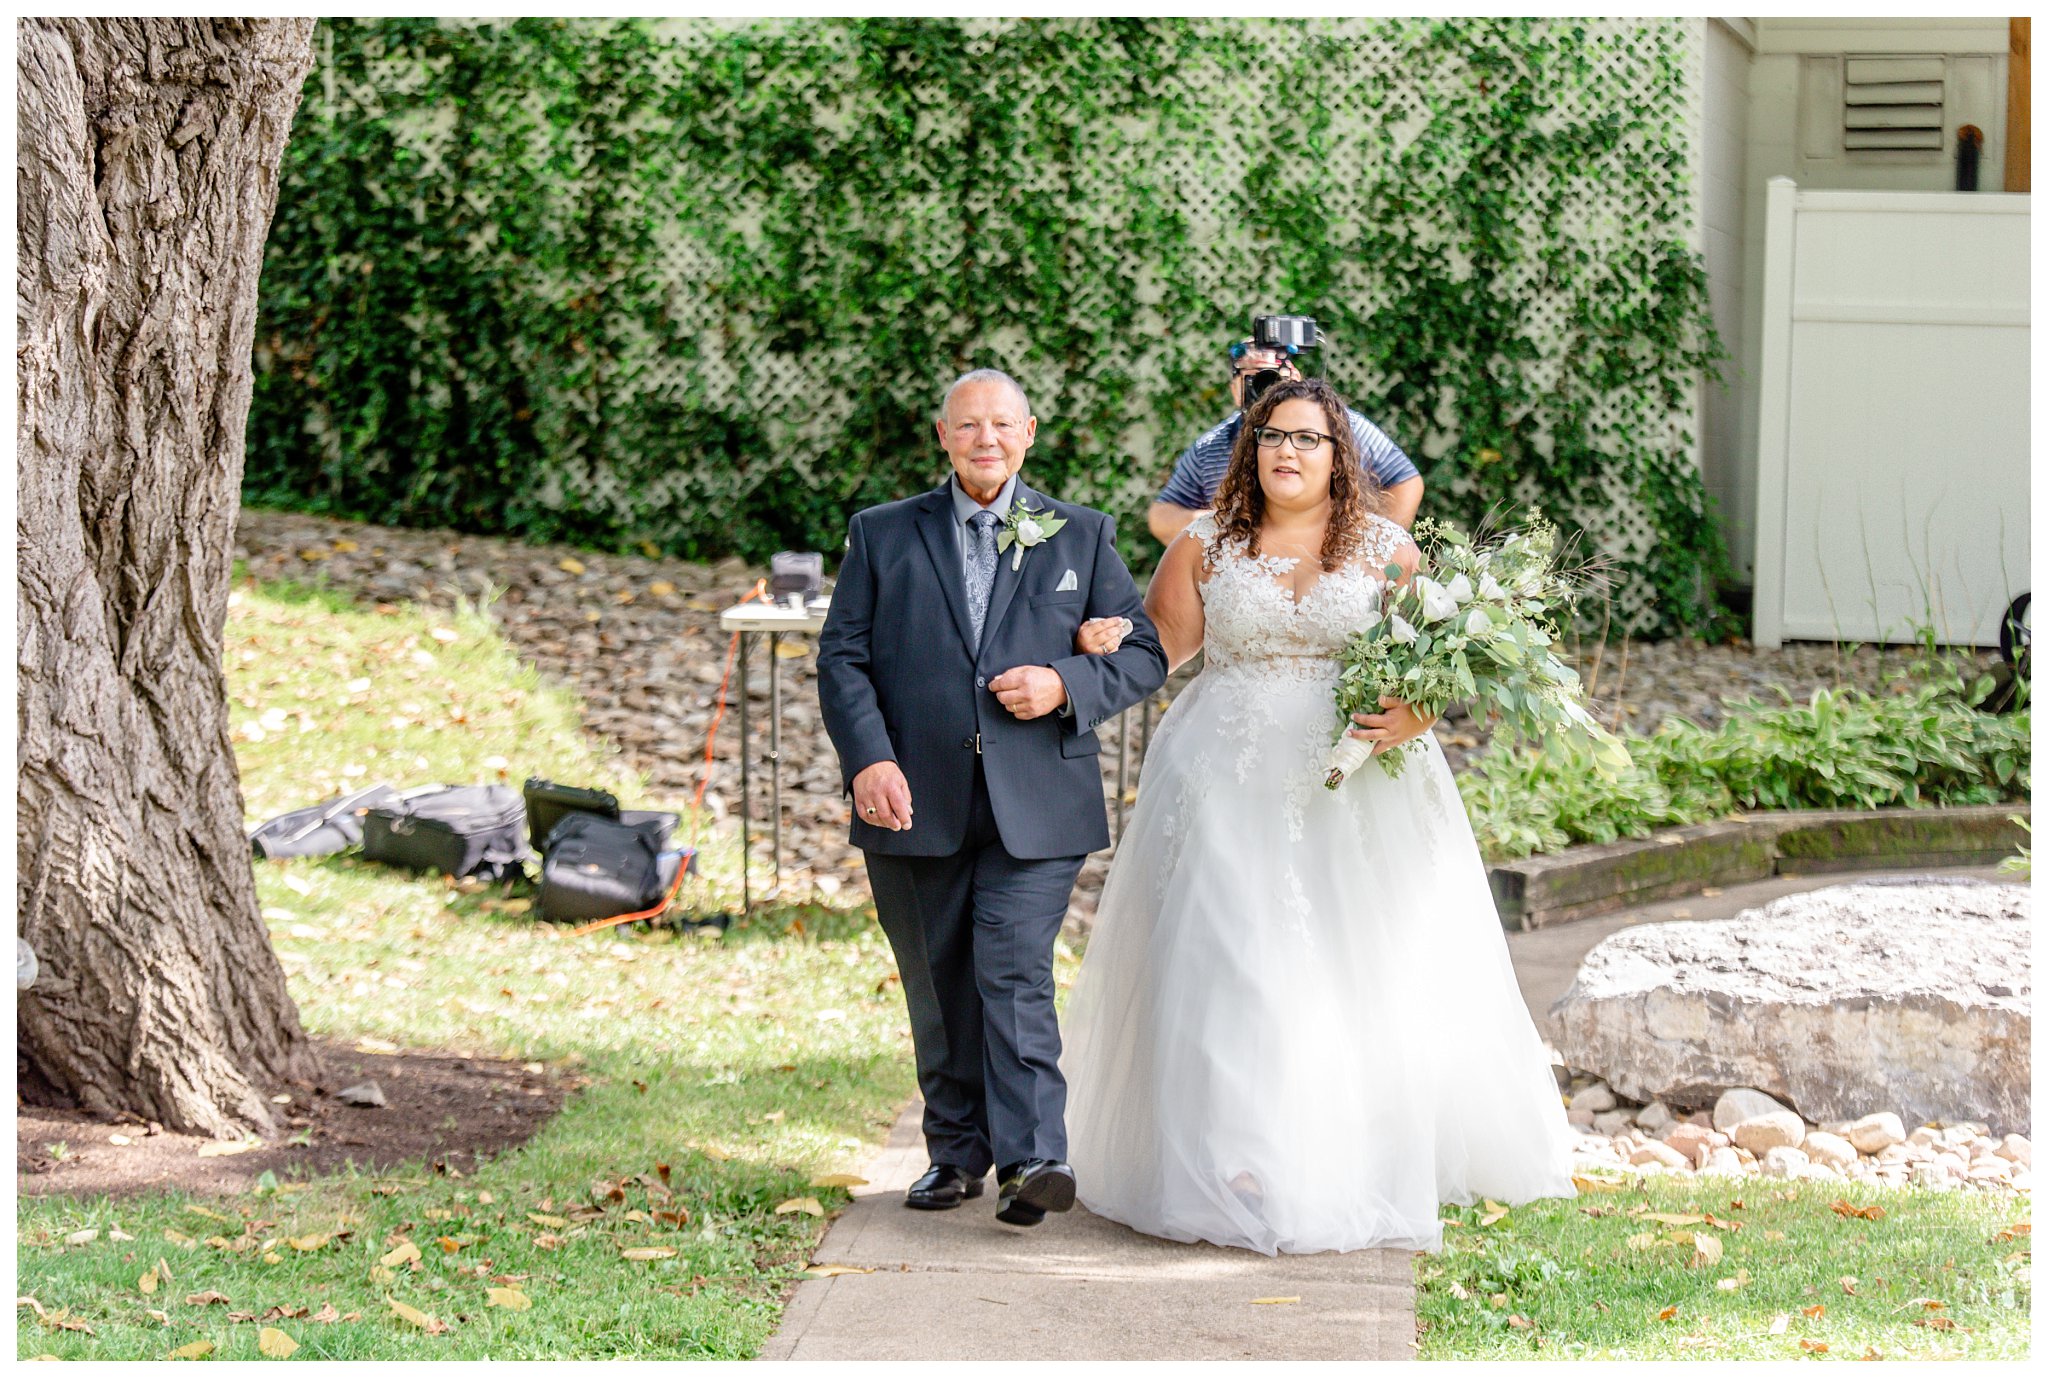 Dibble's Inn Apply Orchard Wedding. Emily and Don. Summer 2020. Joanna Young Photography_0019.jpg